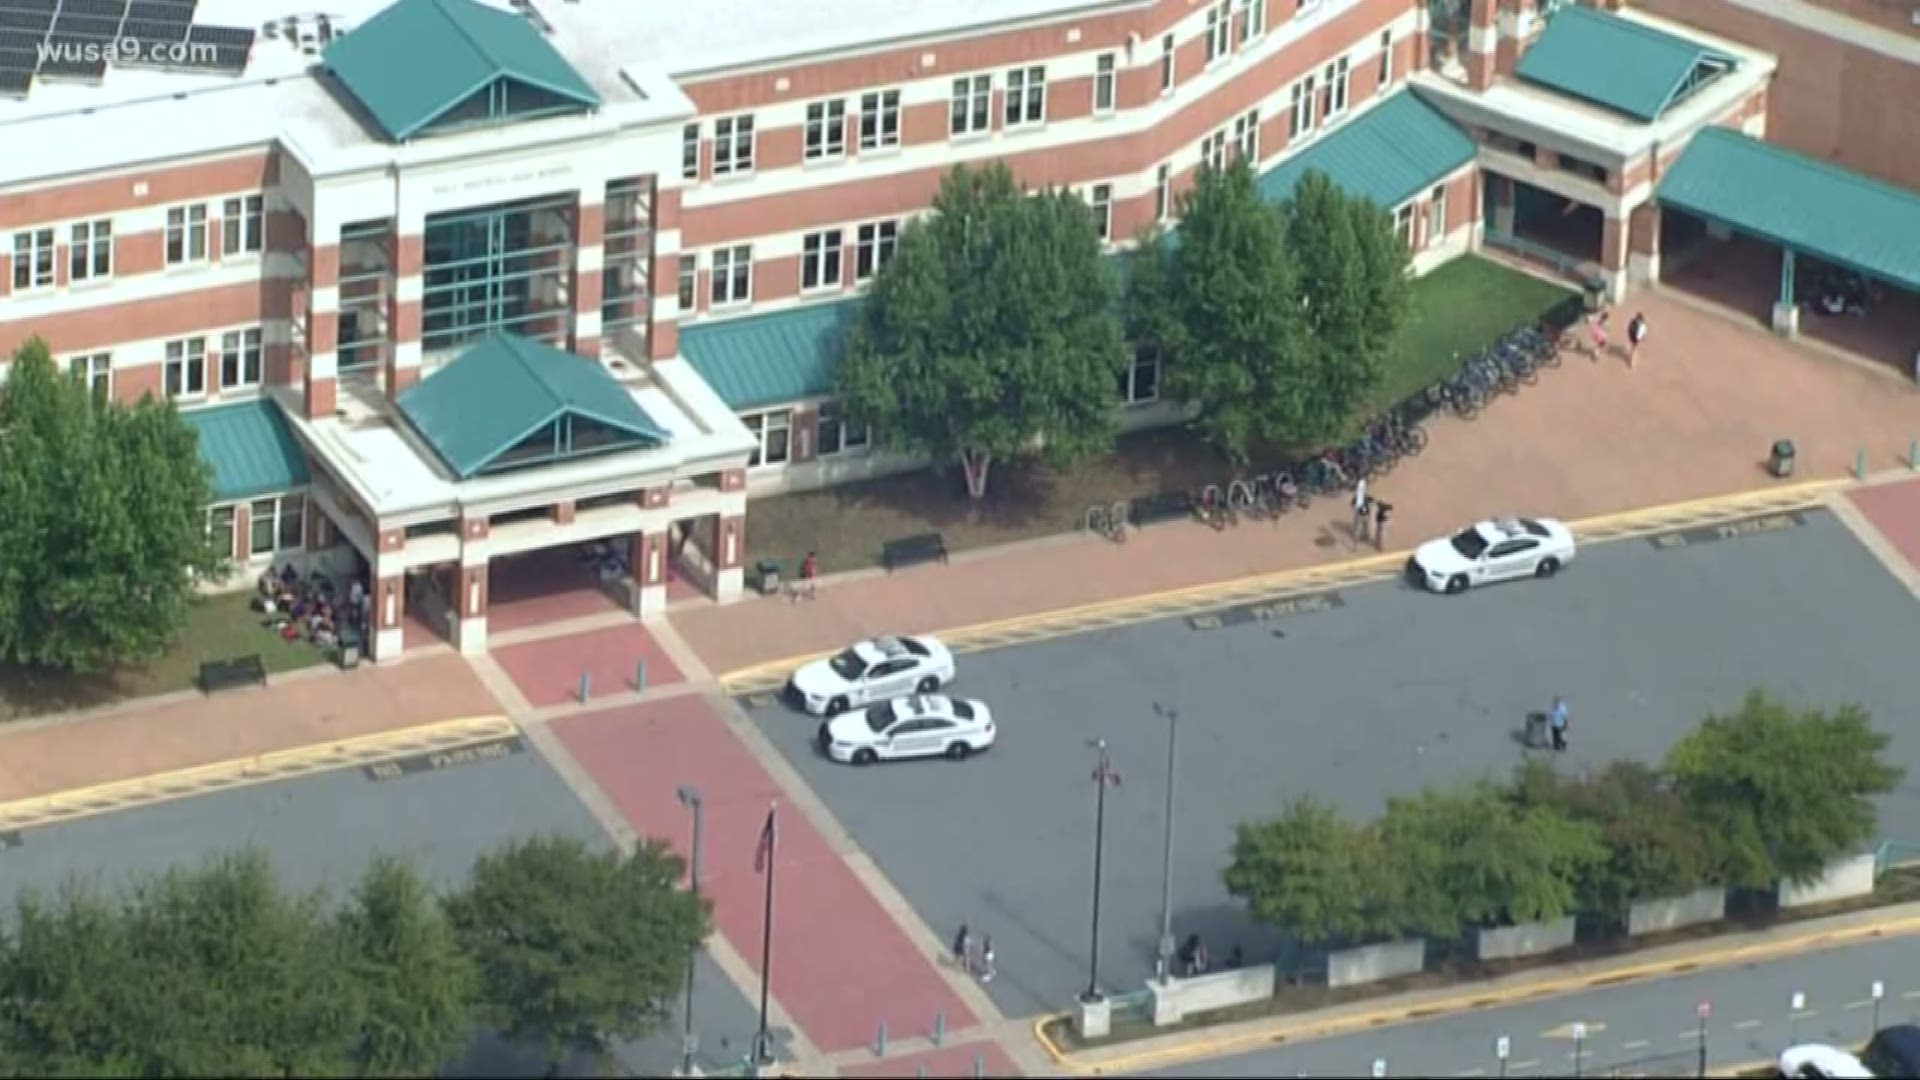 A frying pan -- used as a weapon -- at a local high school. Montgomery County police say one student used a frying pan to hit another student.
It happened Monday at Walt Whitman High School in Bethesda.